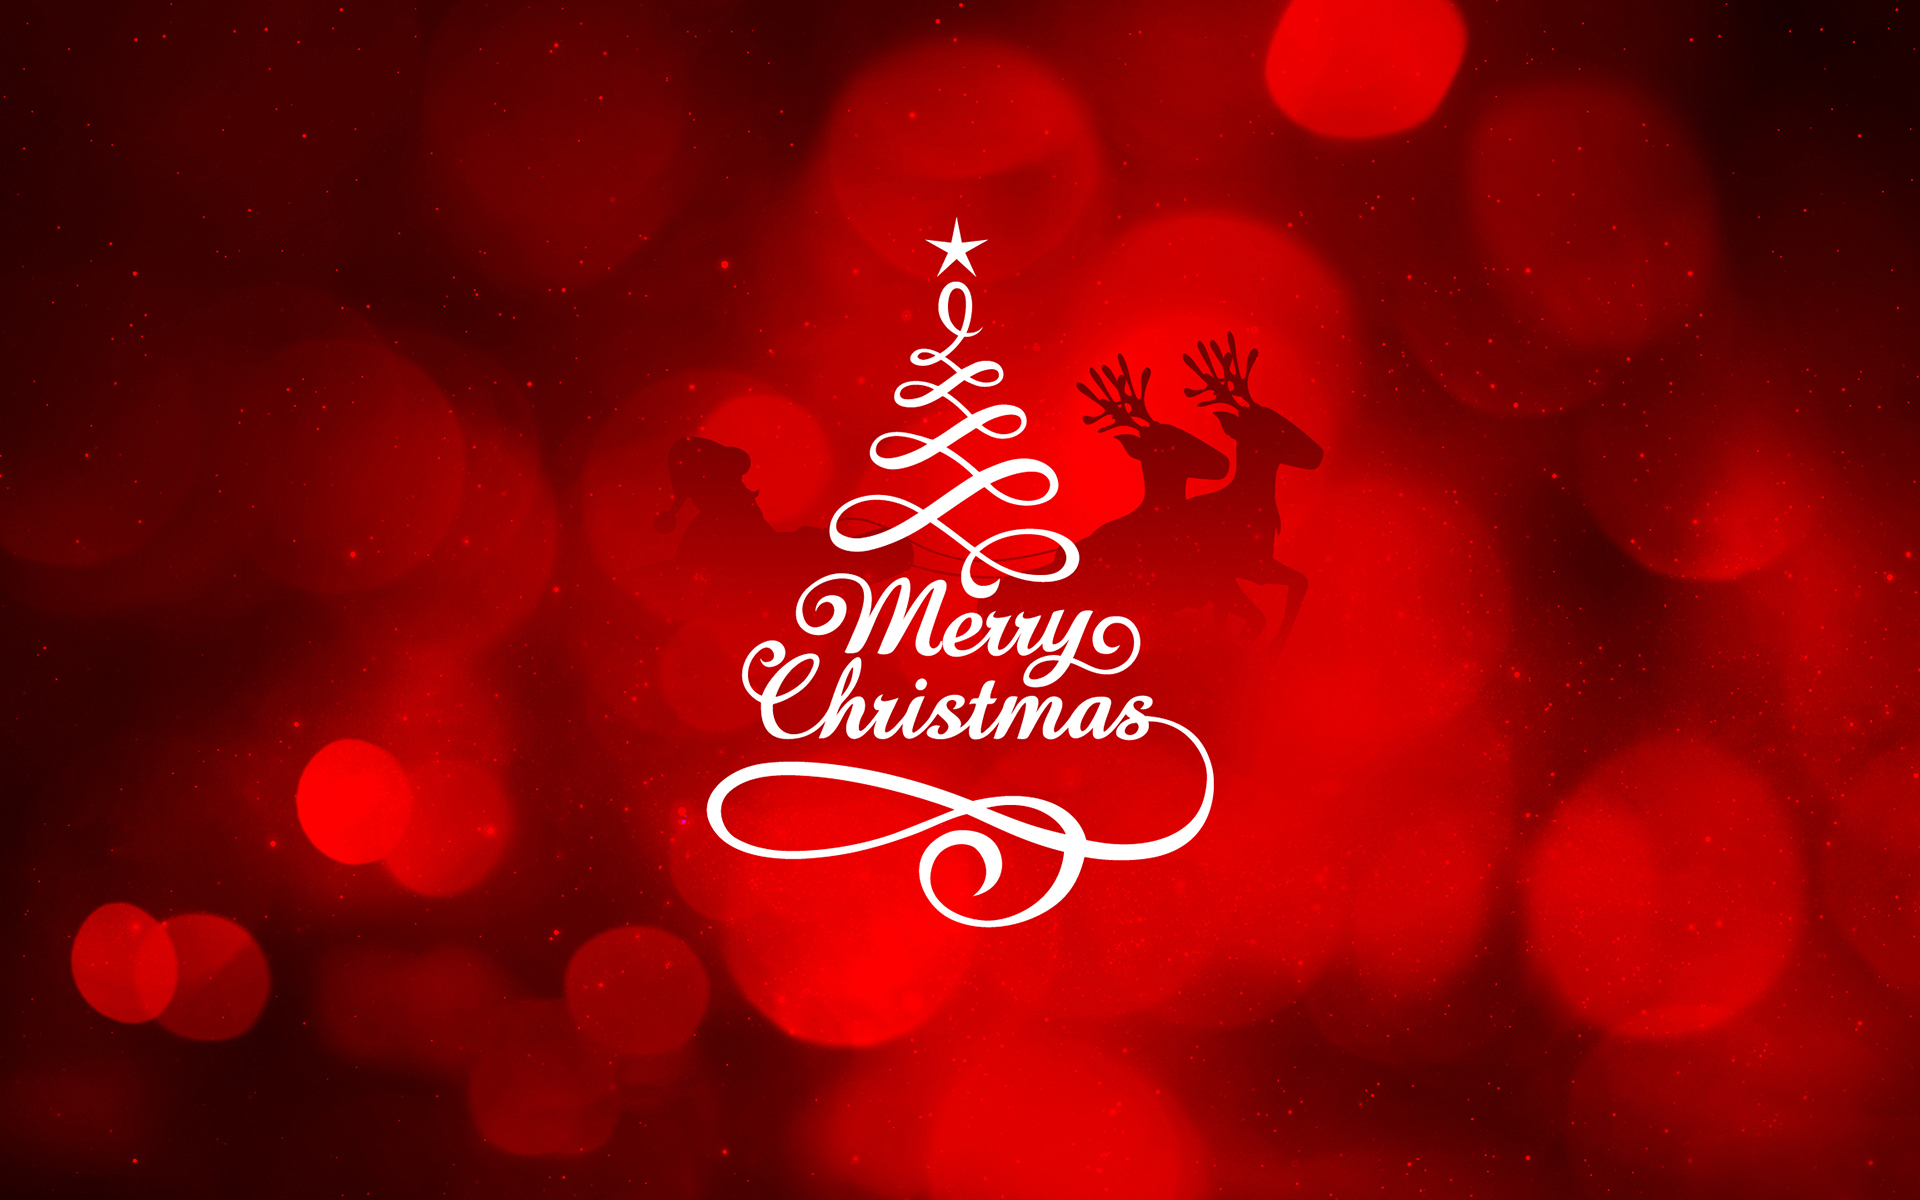 Merry Christmas New 2014 HD Wallpapers 1920x1200